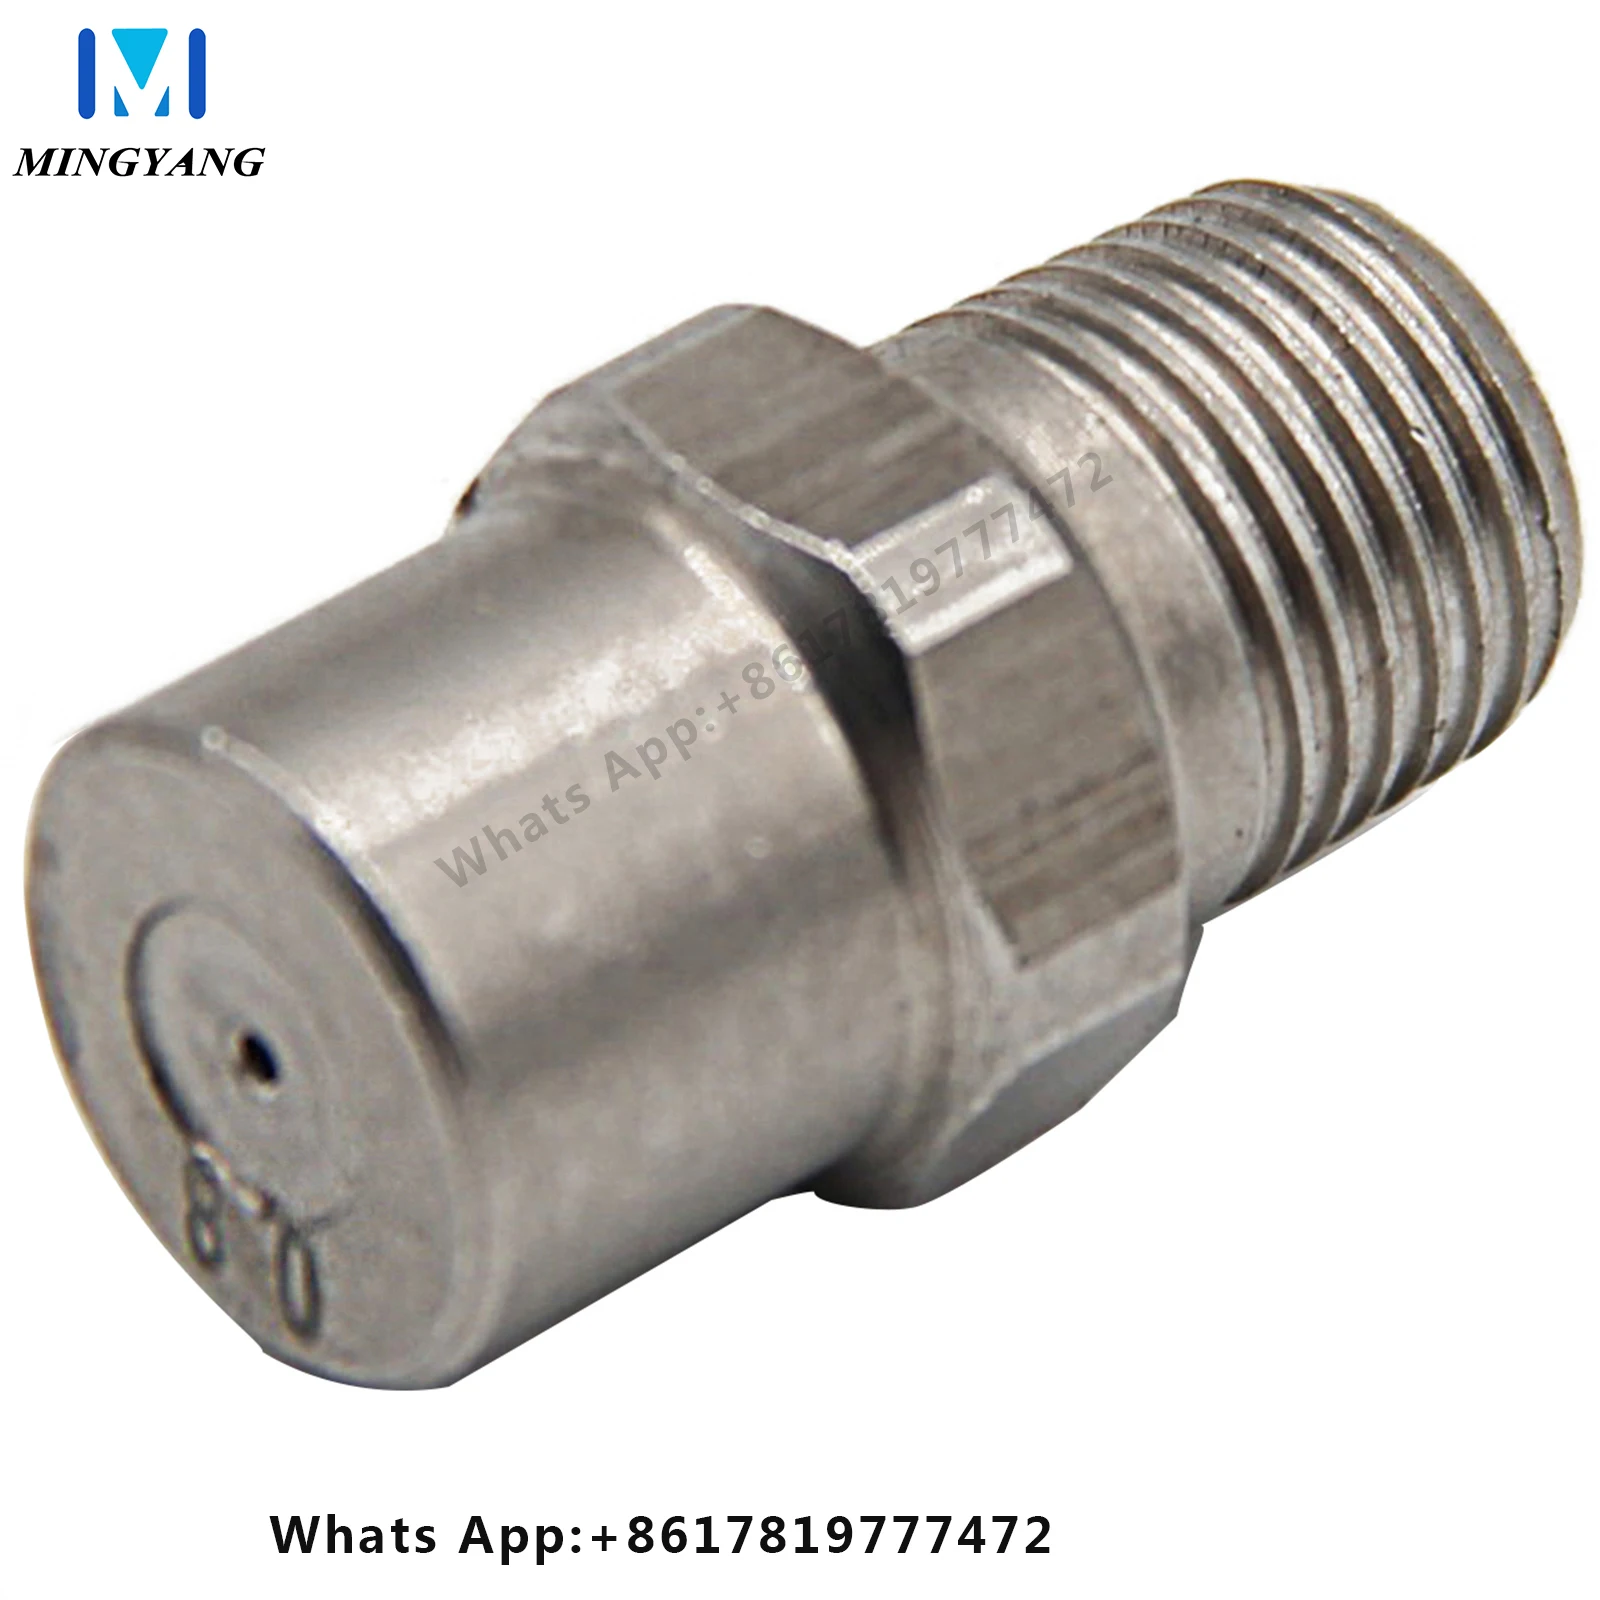 

1/8"1/4"3/8"1/2" 3/4" 304 Stainless Steel Full Cone Cleaning Water jet Spray Nozzle BB Series Full Cone Spray Nozzle